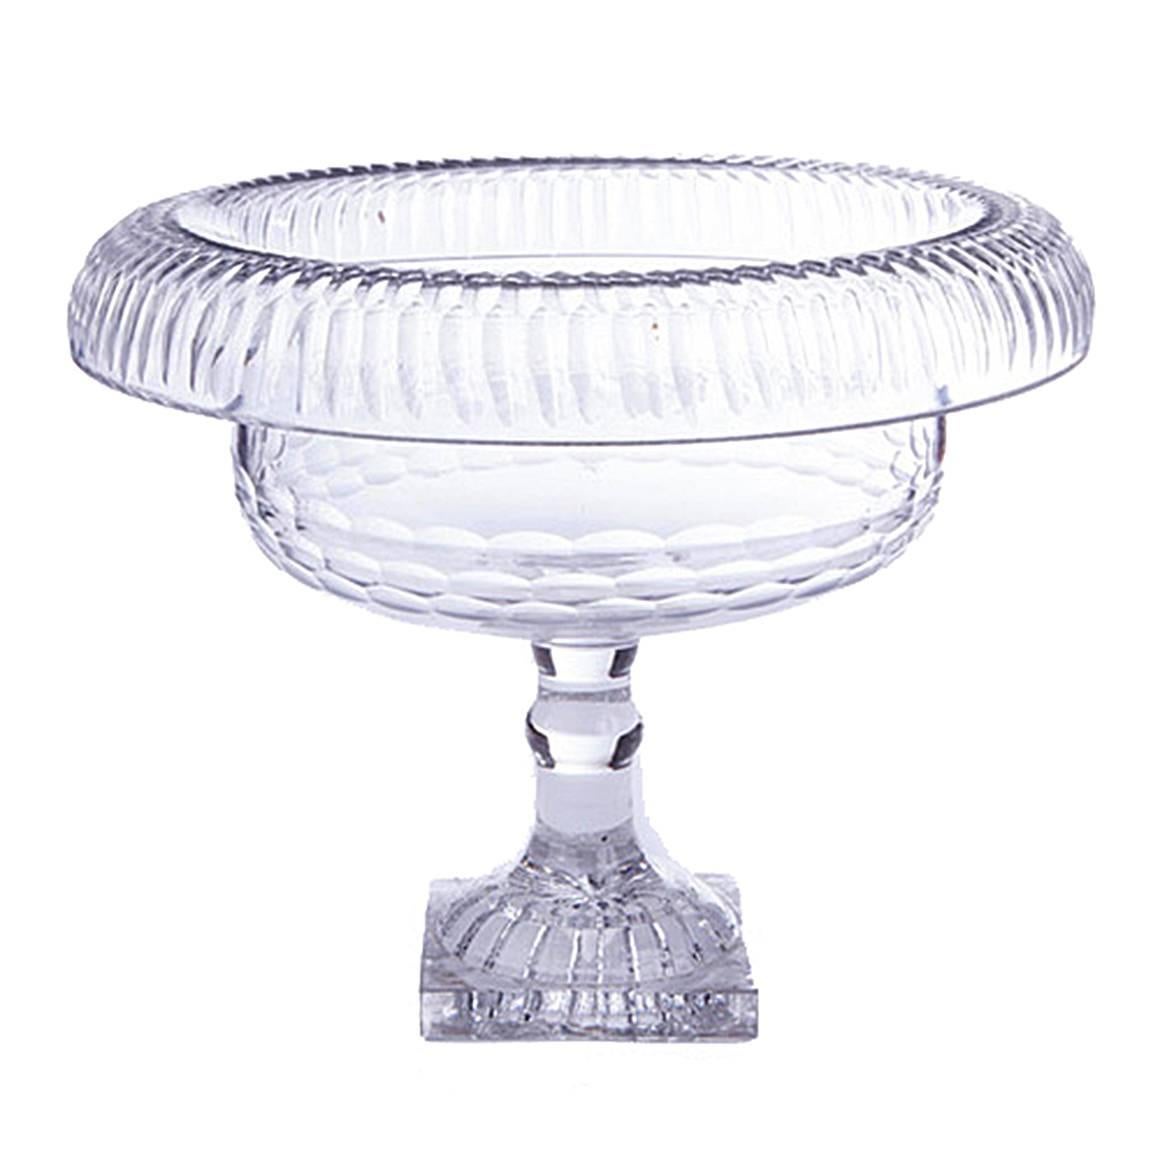 18th Century Georgian Decorative Cut Glass Footed Bowl For Sale